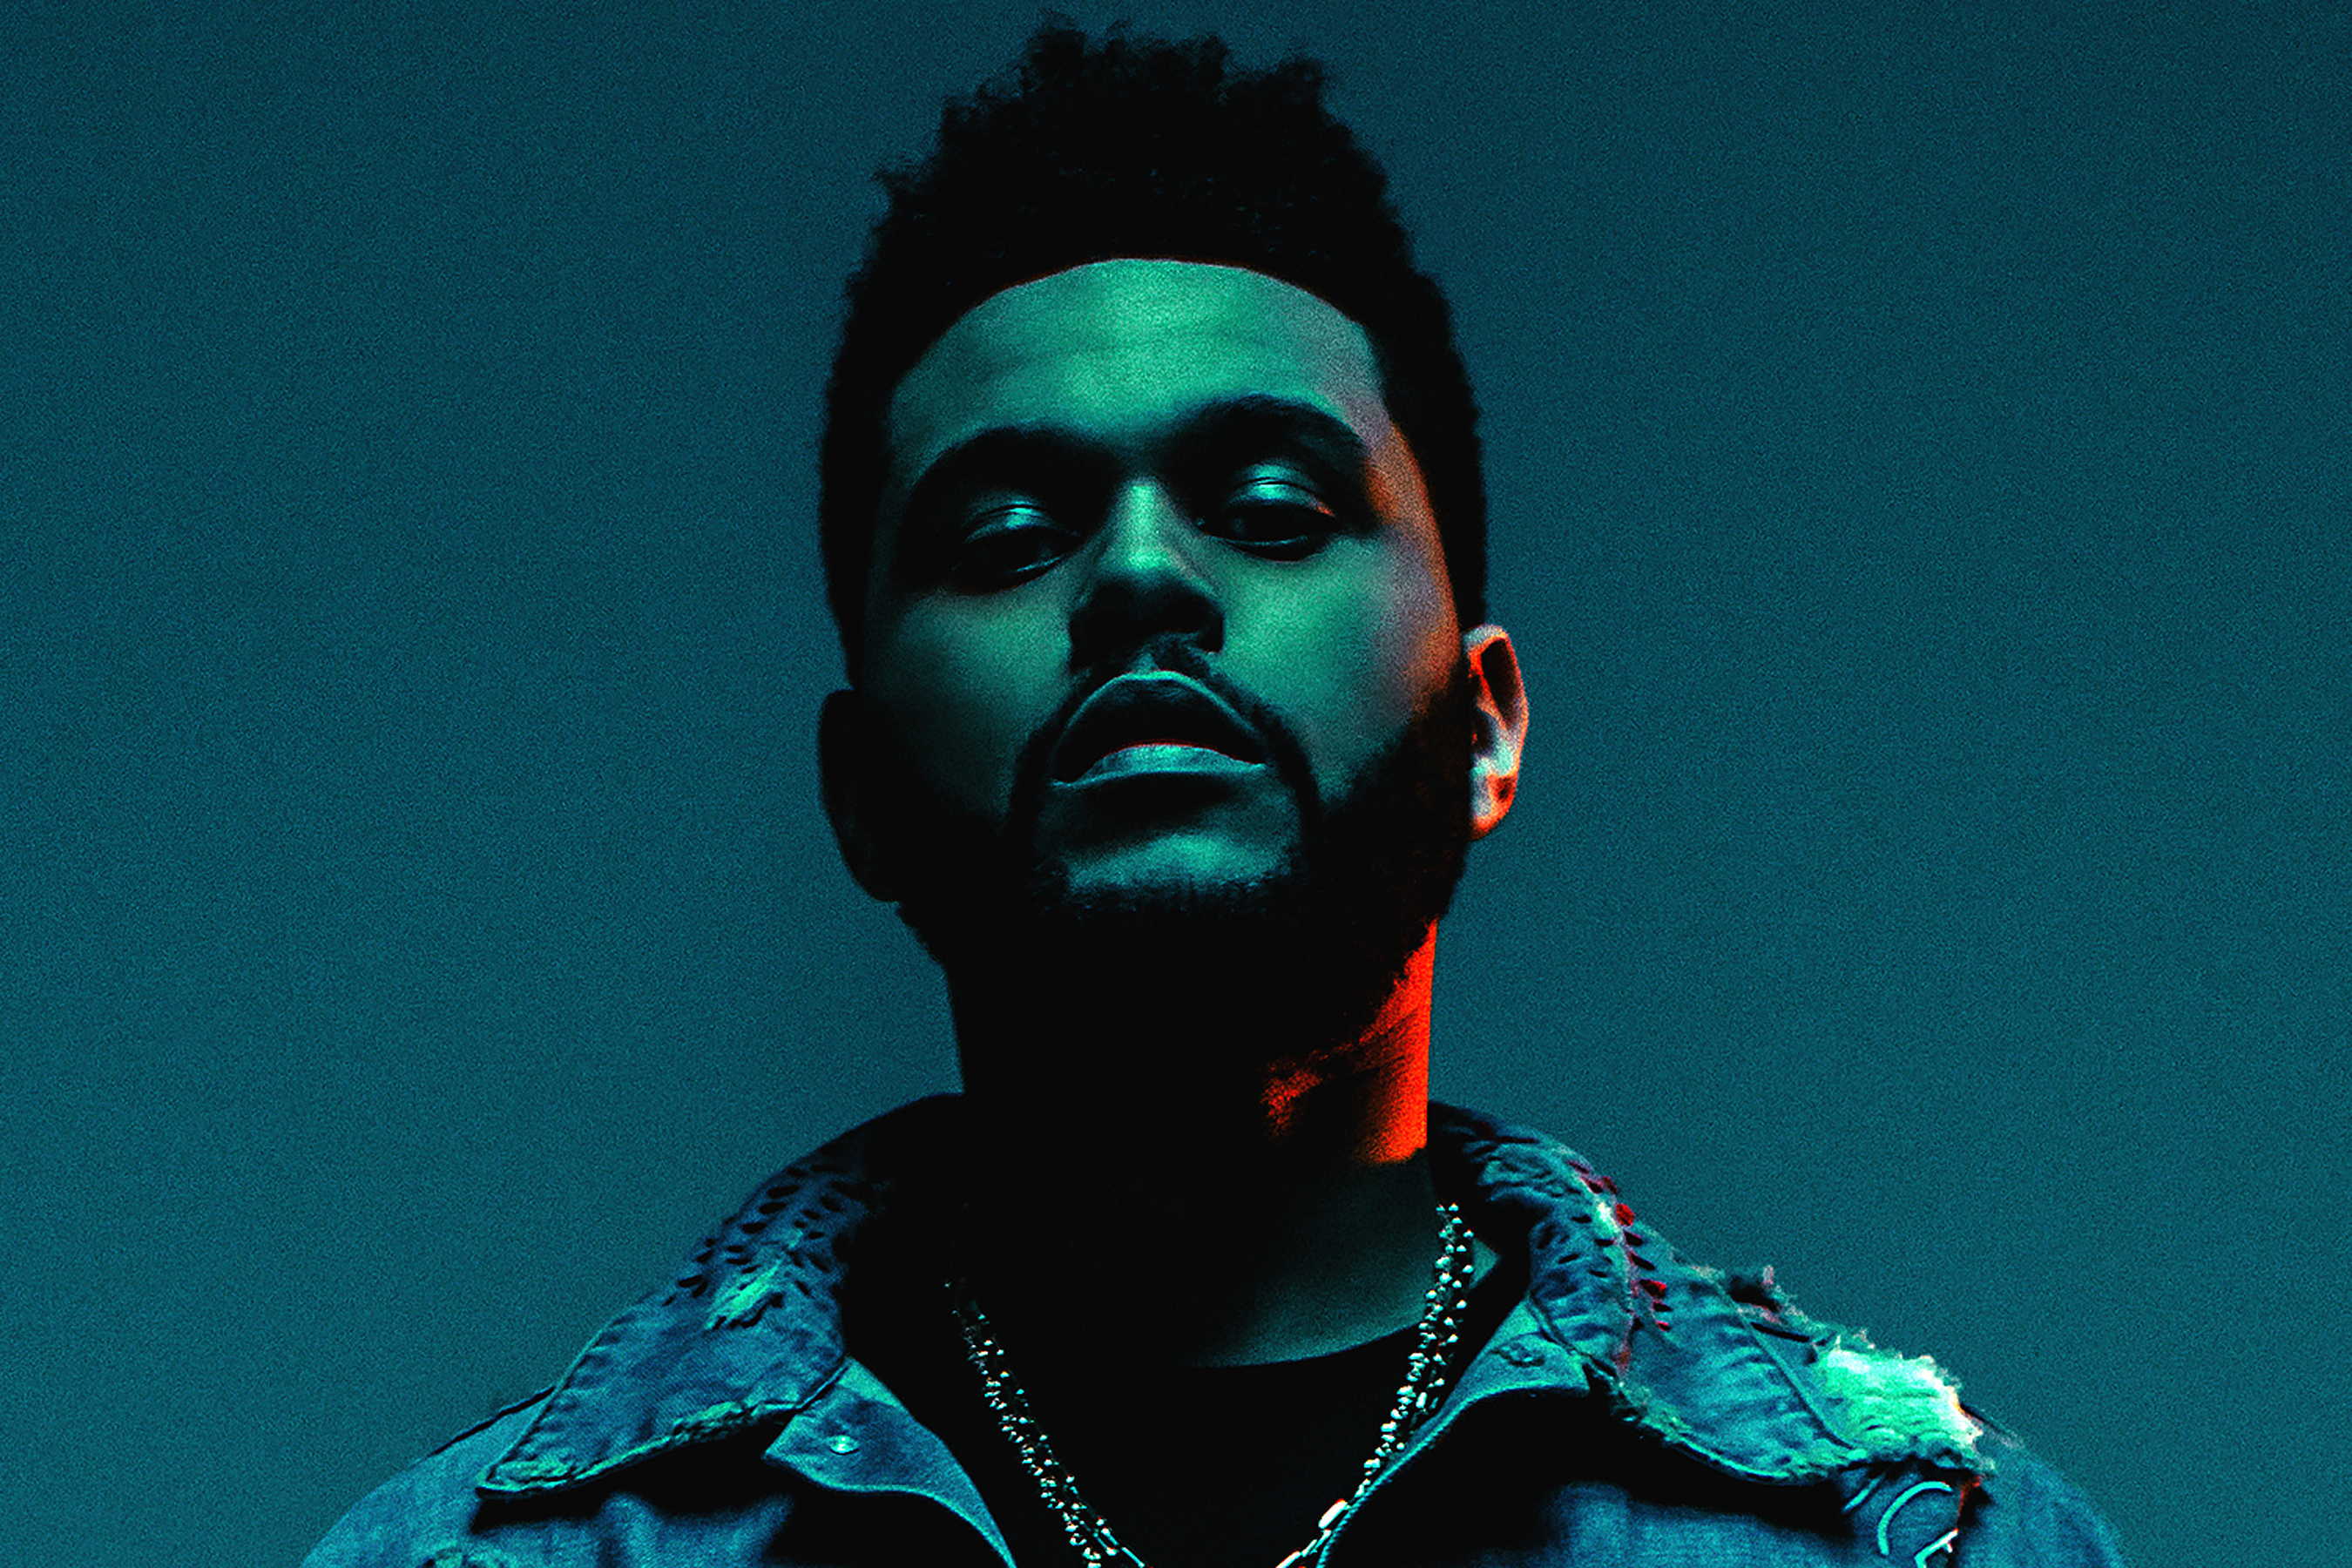 Thinking about the weekend. The Weeknd. Певец the Weeknd. Эйбел Макконен Тесфайе. Abel the Weeknd.